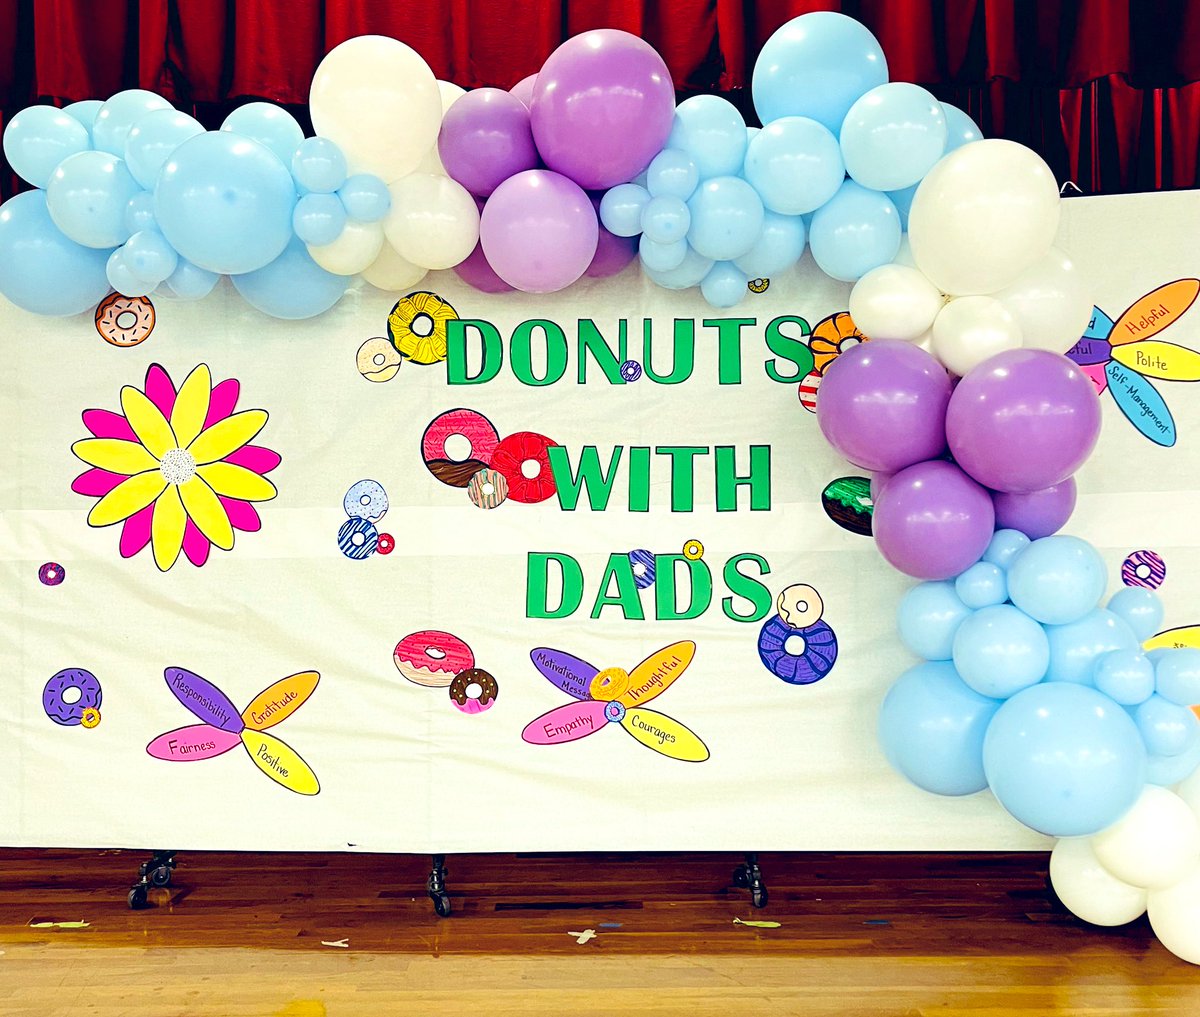 Donuts with Dad was a huge success! Thankful for everyone that collaborated in this event, our students were so excited! ☺️ @StehlikES_AISD @Garza17D @Stgarner_AP #AldineConnected